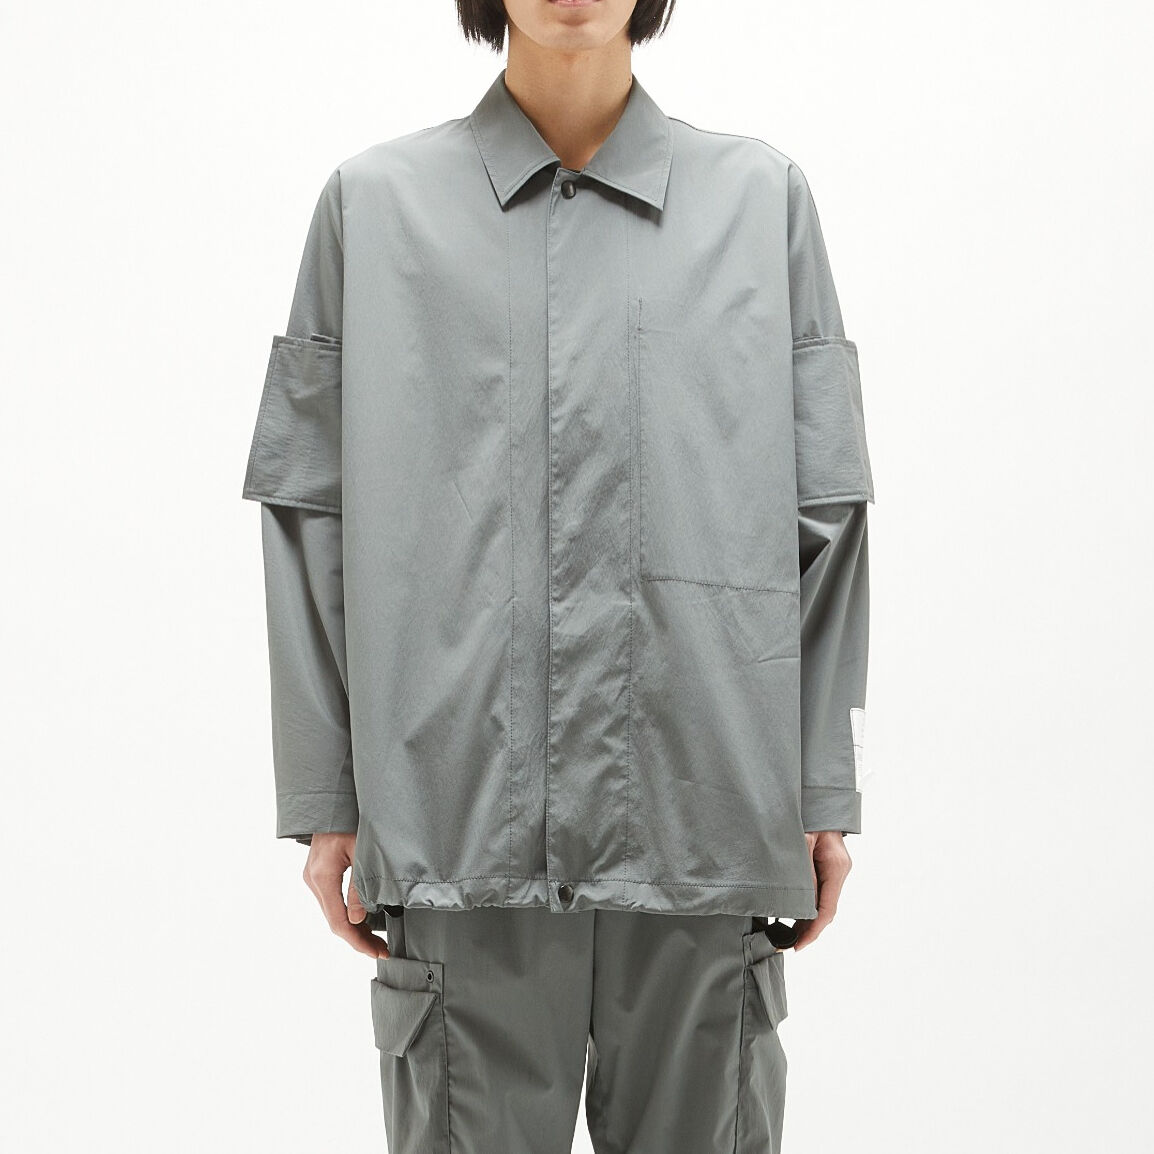 22A/W】N.HOOLYWOOD TEST PRODUCT EXCHANGE SERVICE TRAINING BLOUSON ...